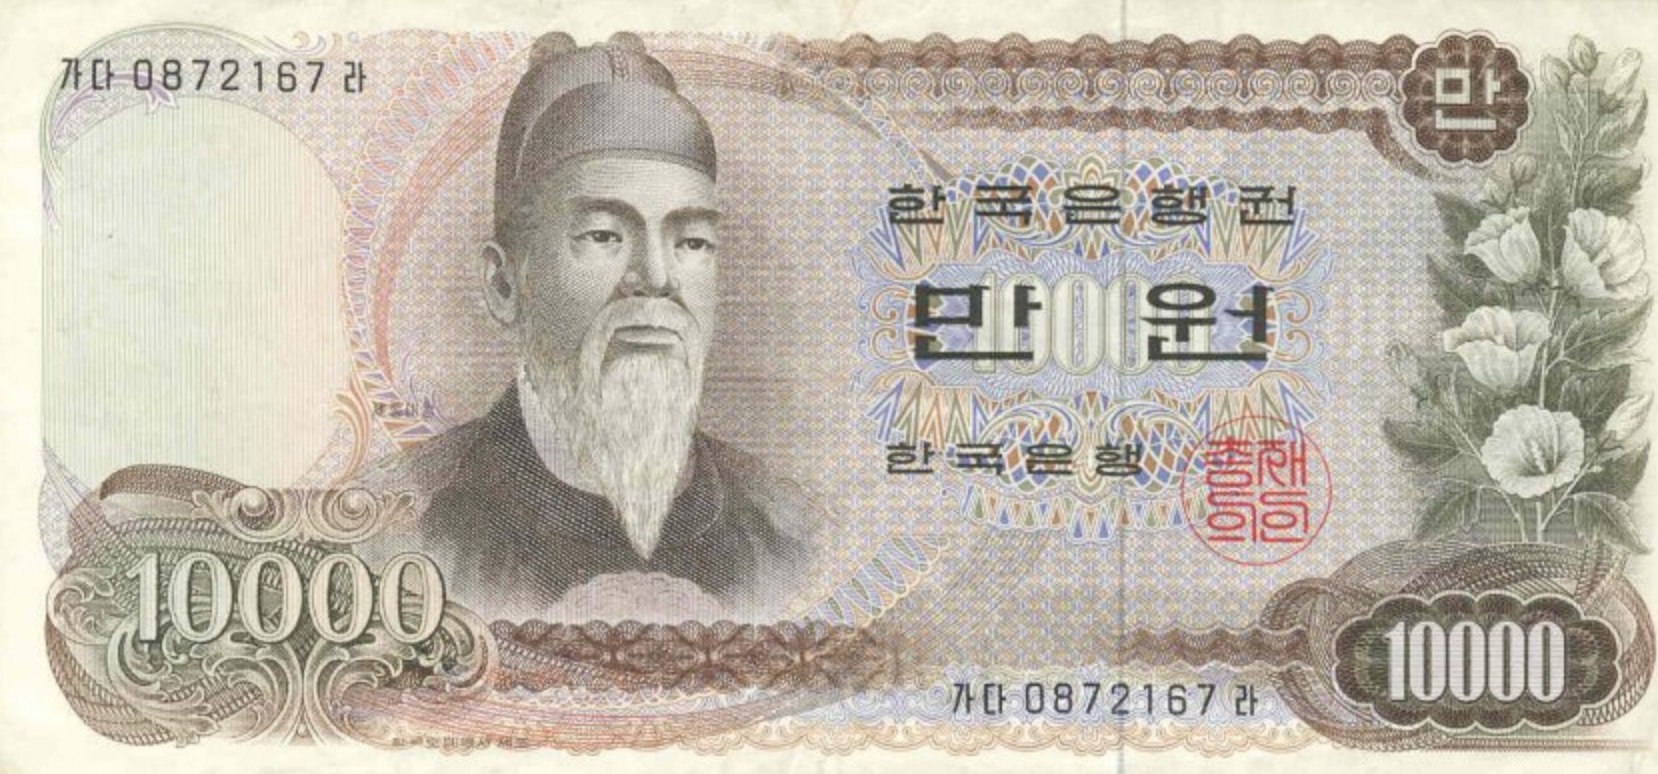 10000 South Korean won banknote (1973 issue)